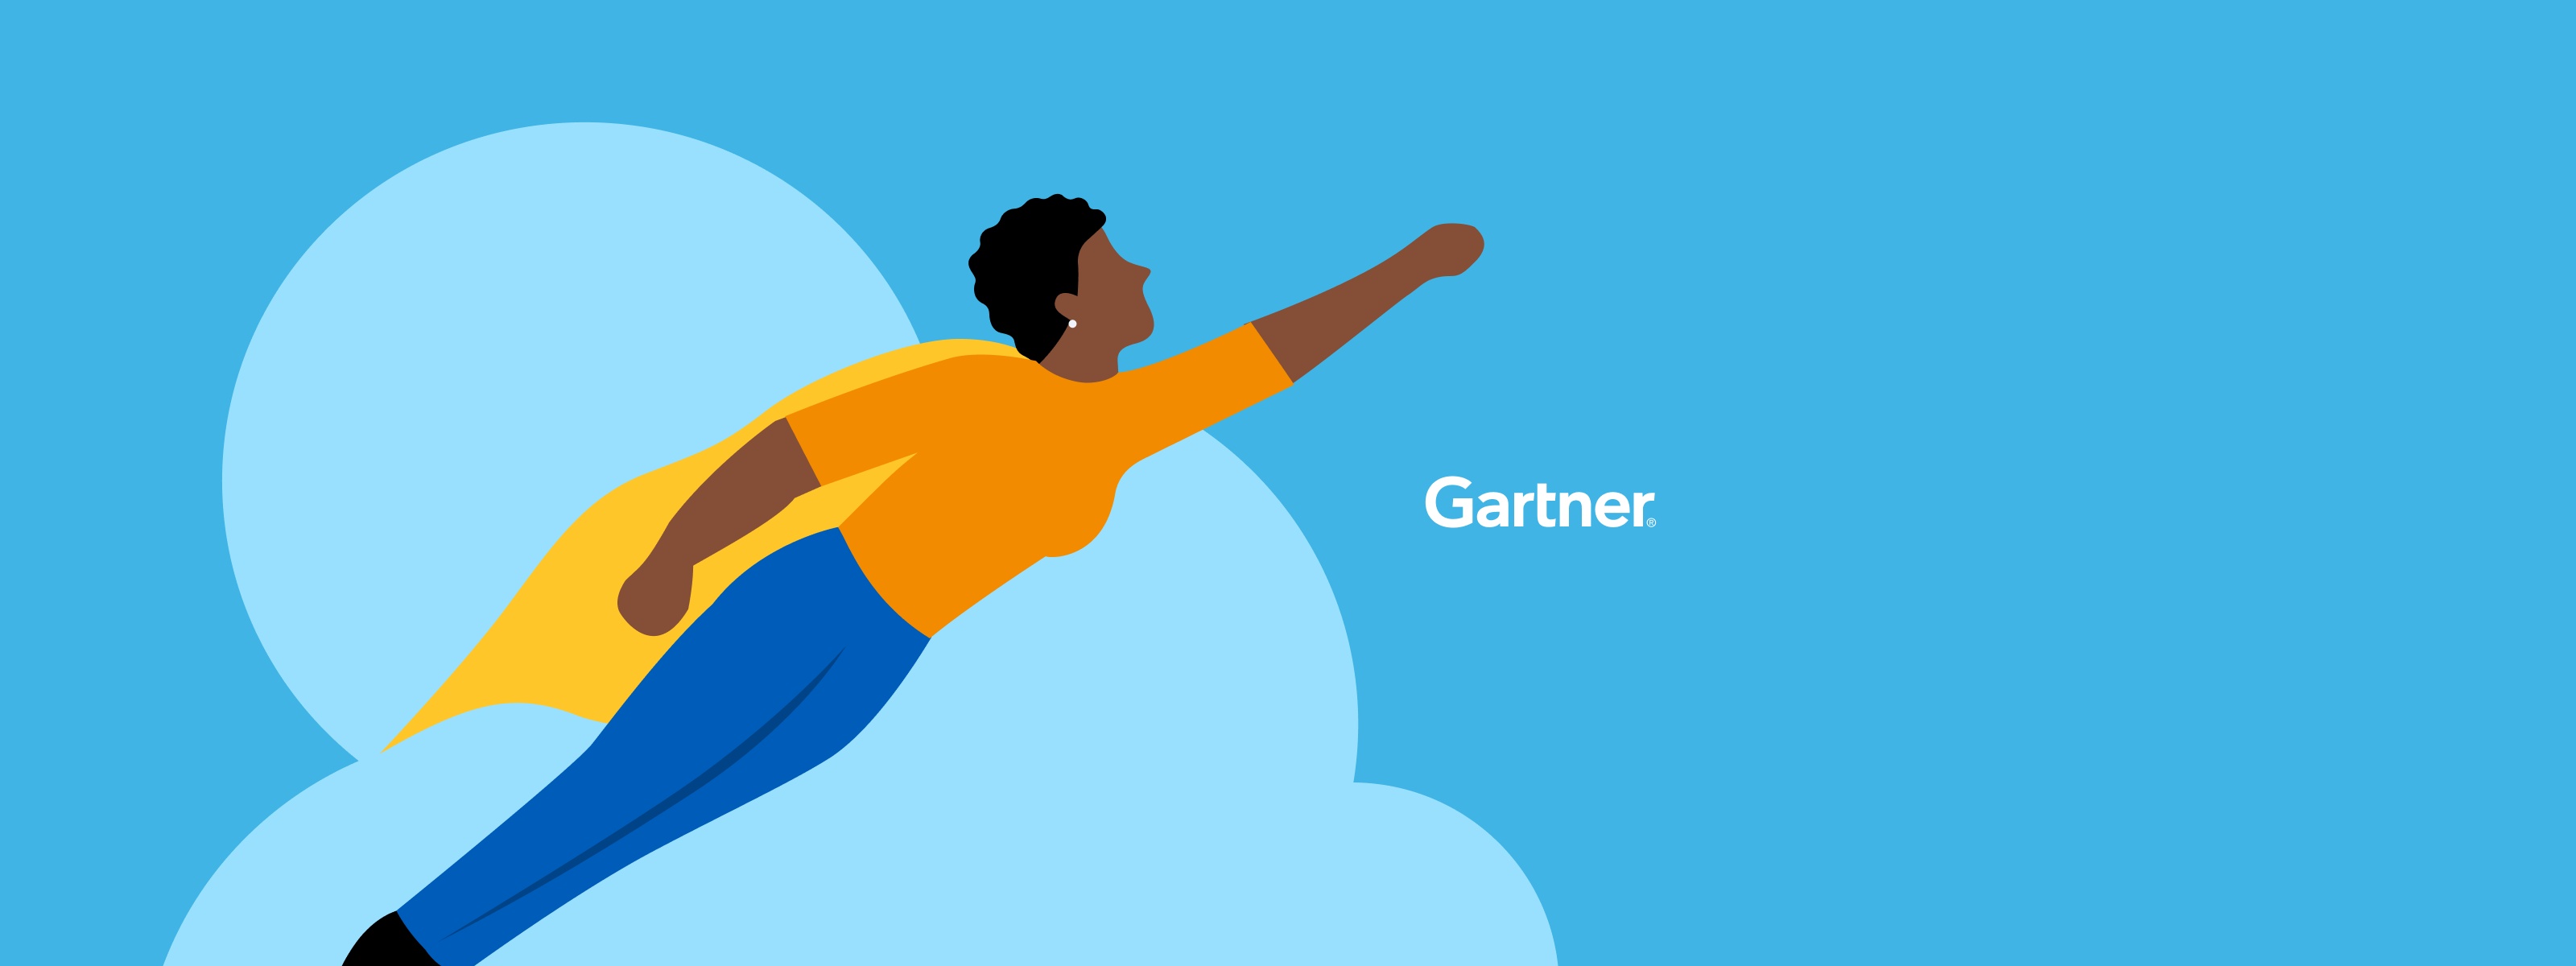 Workday Named a Leader in the 2021 Gartner Magic Quadrant for Cloud HCM